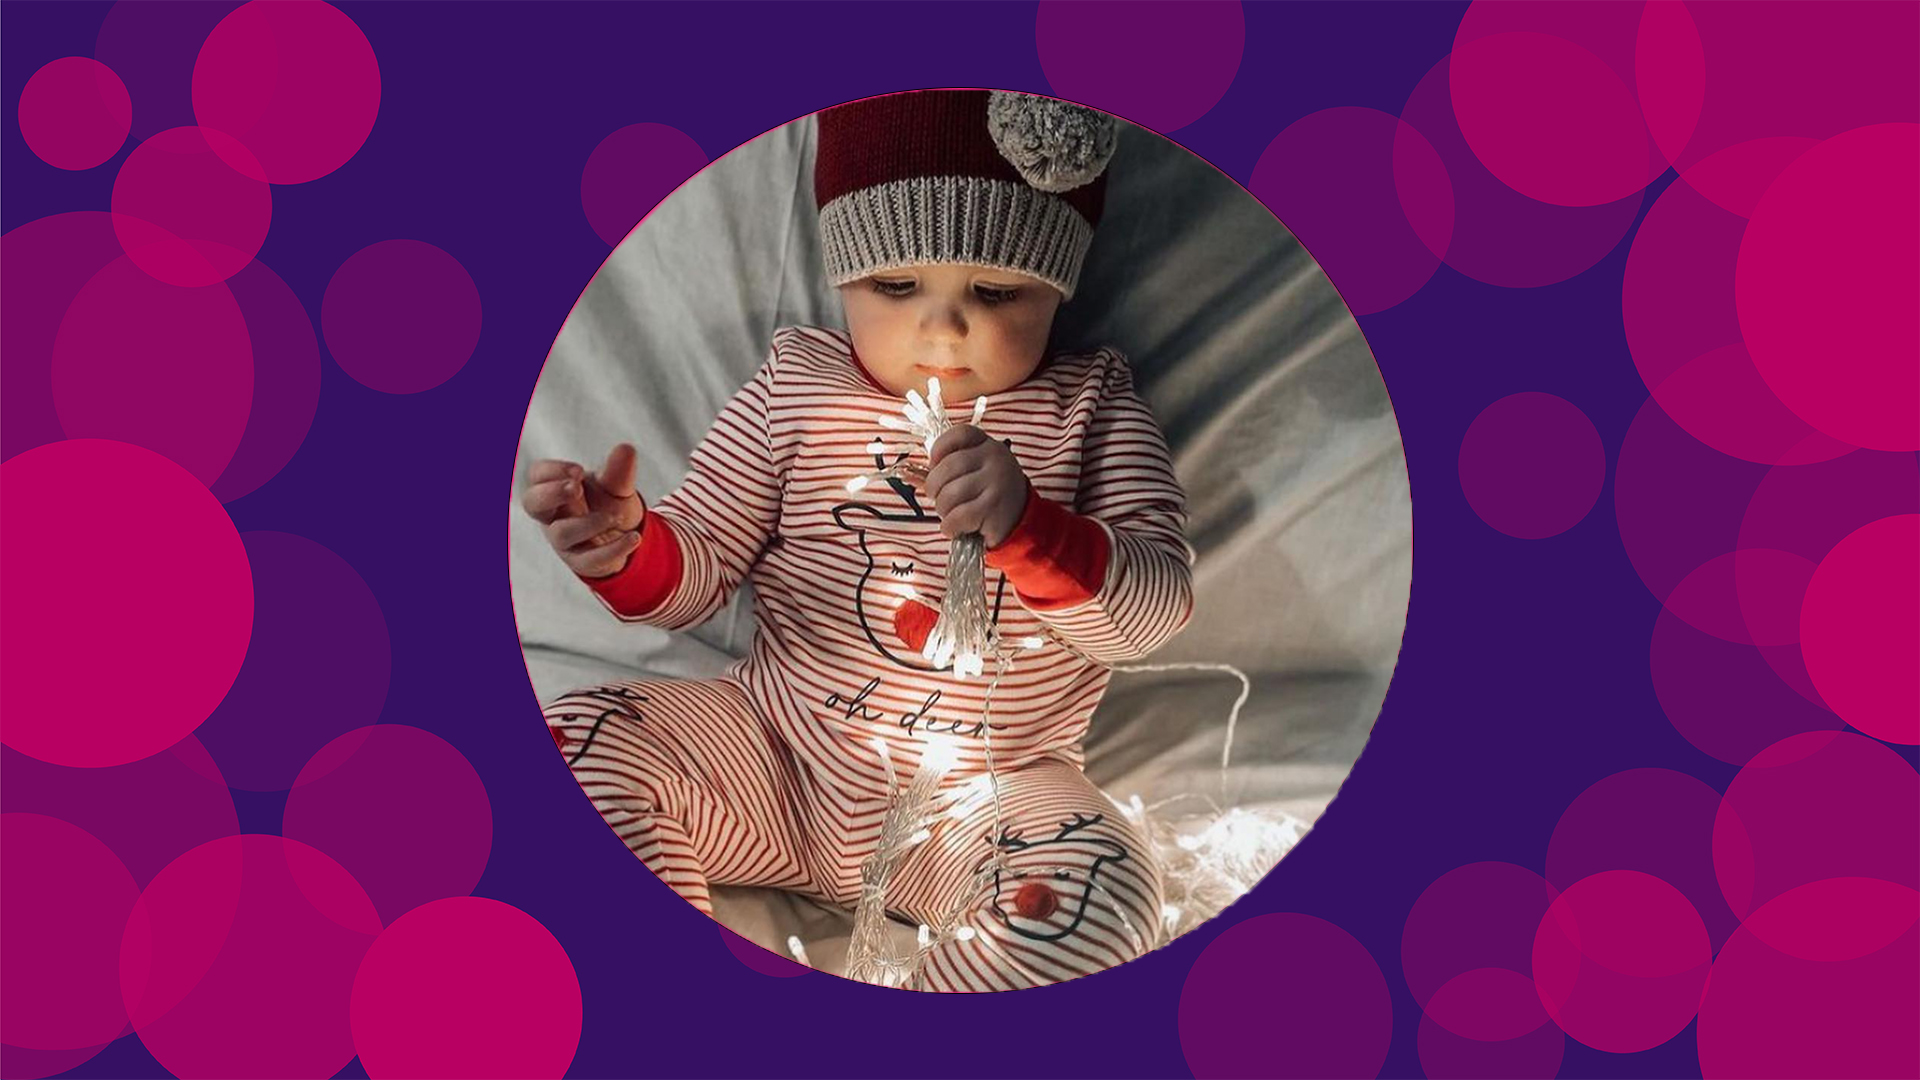 A purple background with pink circles with an image of a baby wearing charlotte wills designs and holding fairy lights